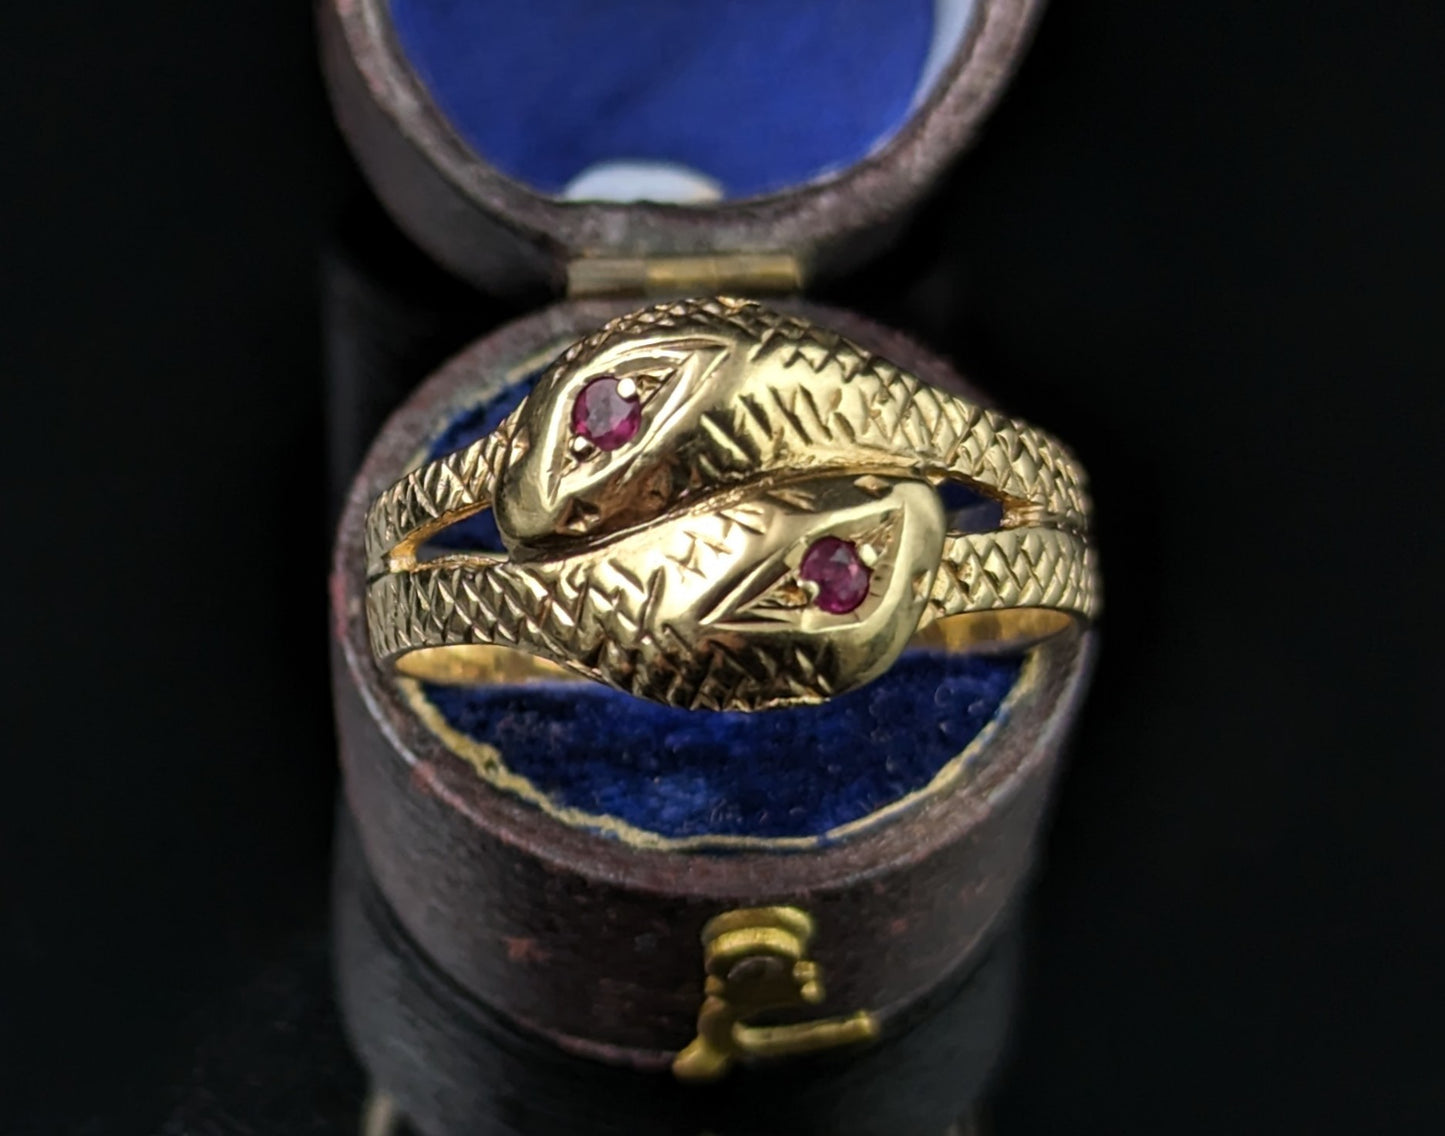 Vintage double snake ring, 9ct gold, ruby, Victorian style